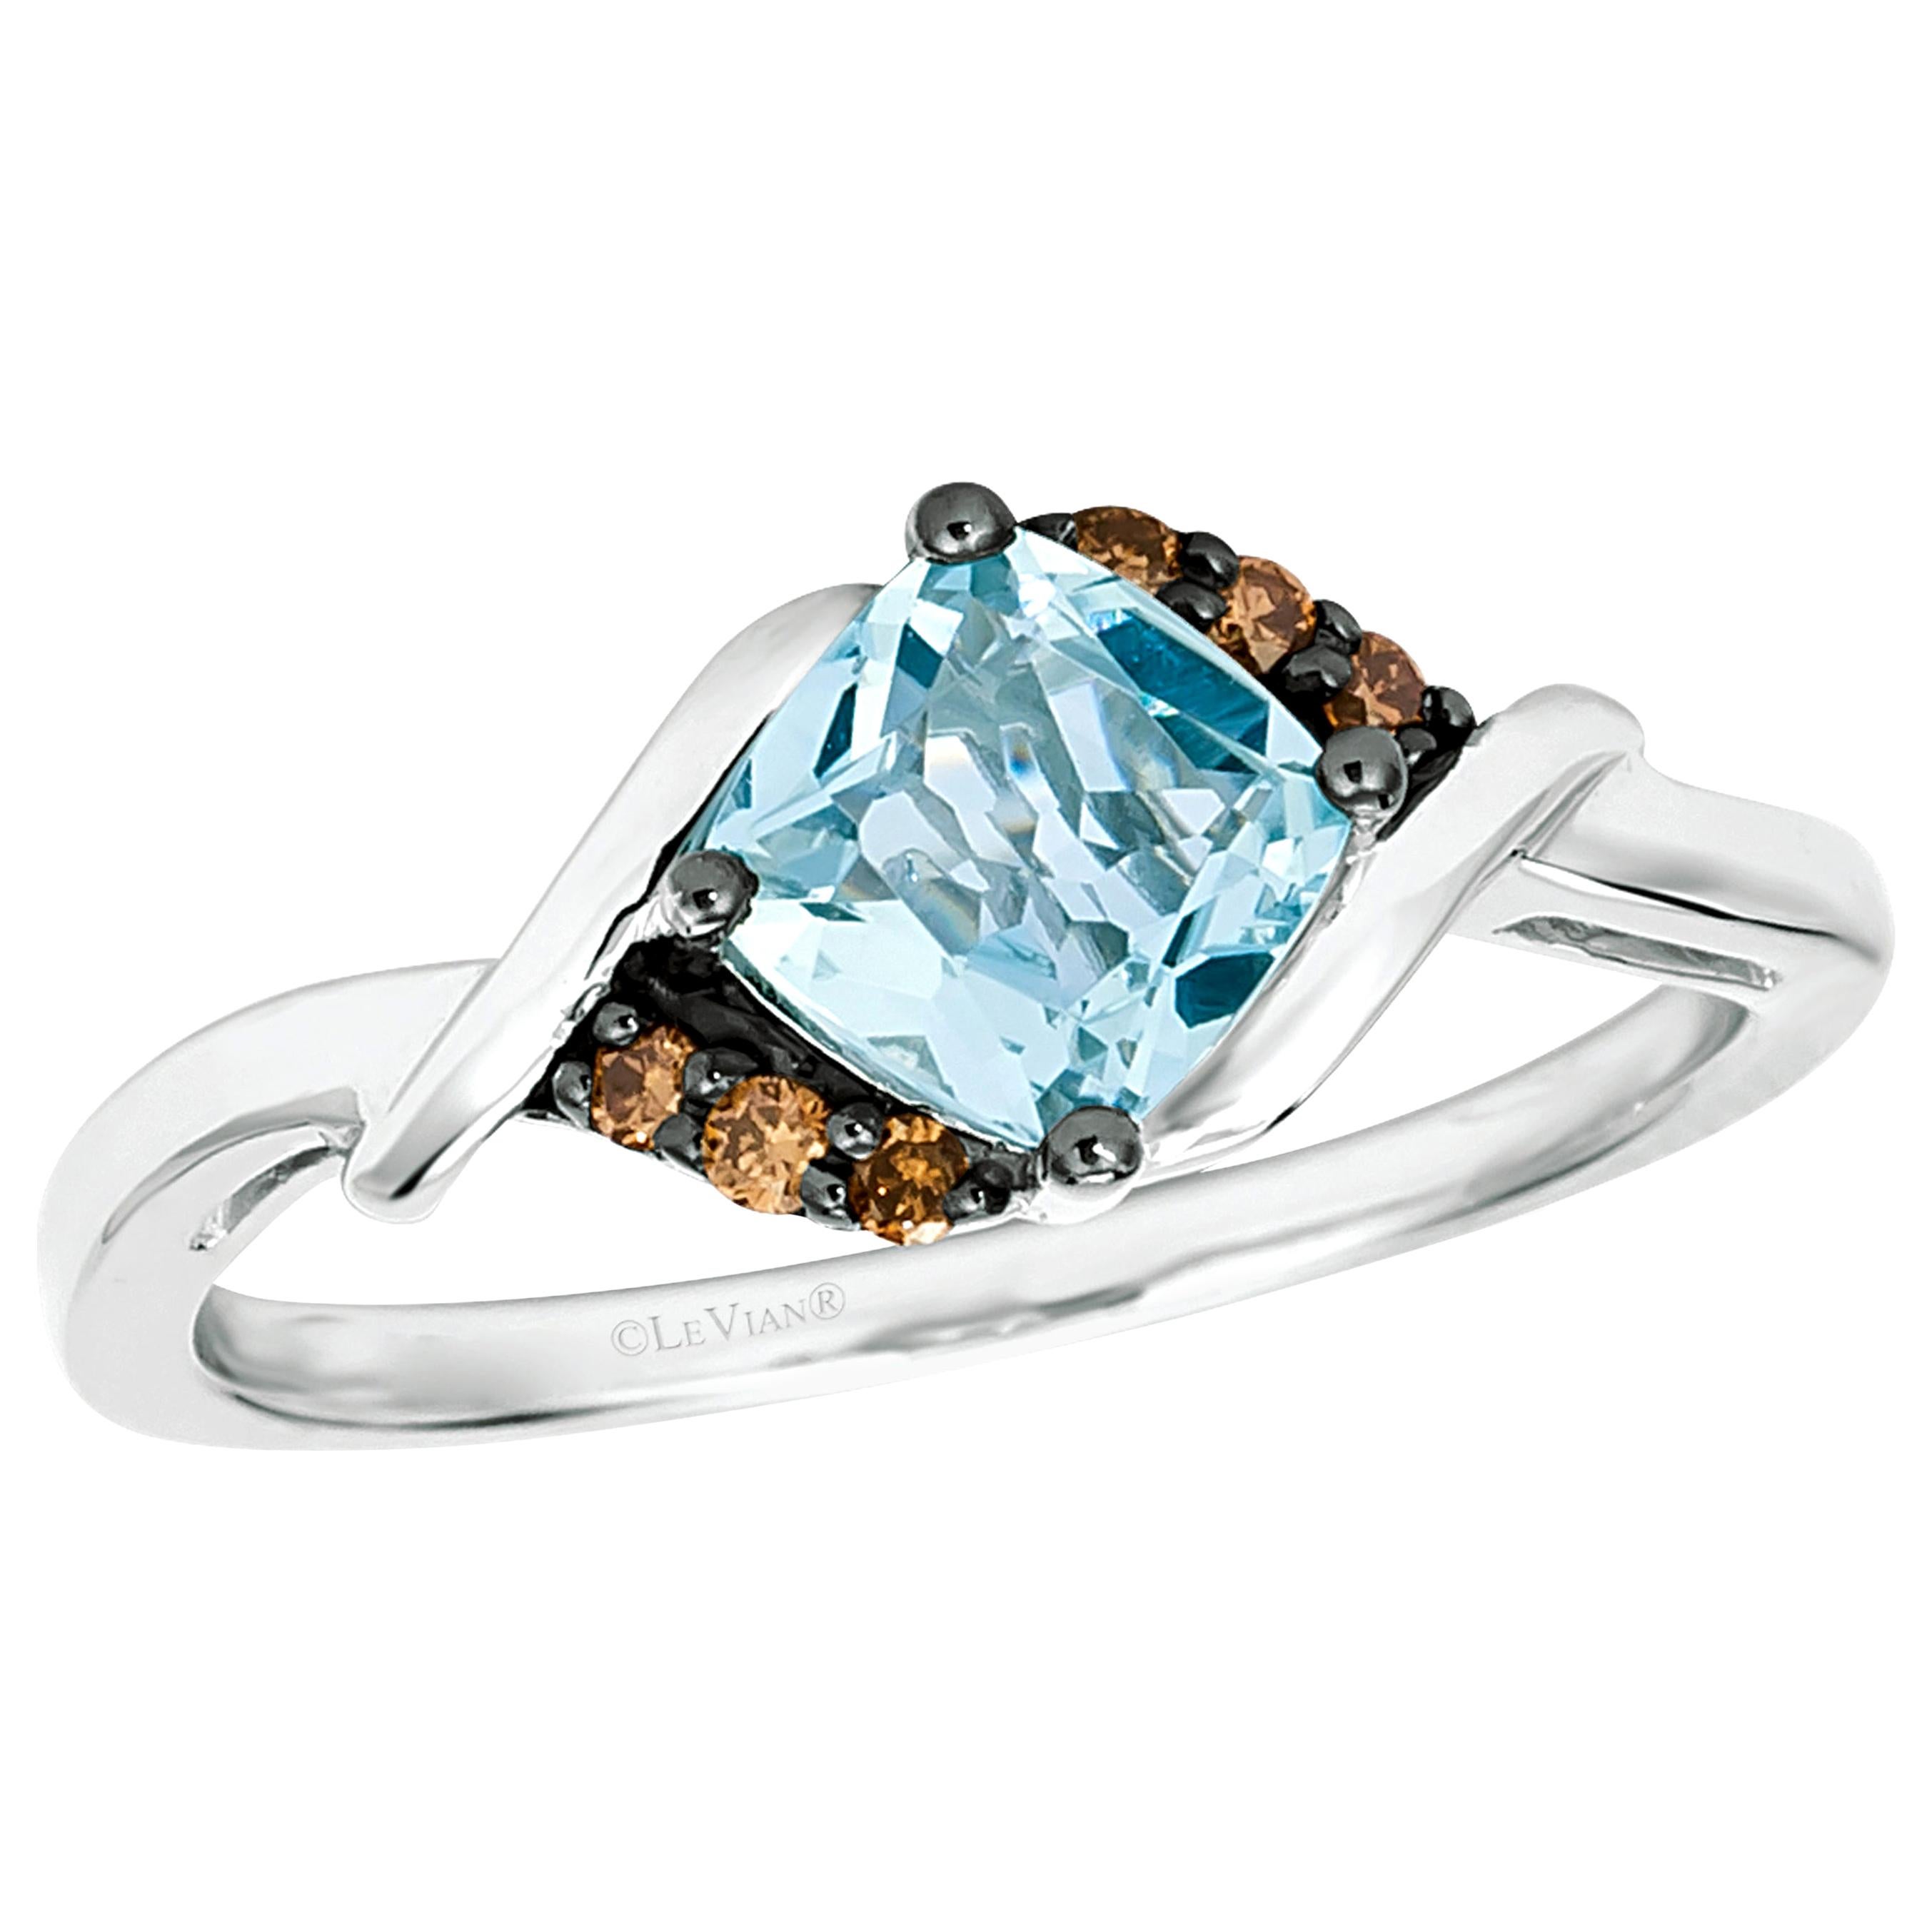 Le Vian 14K White Gold 5/8 Ct Cushion Aquamarine and Brown Diamond Accented Ring